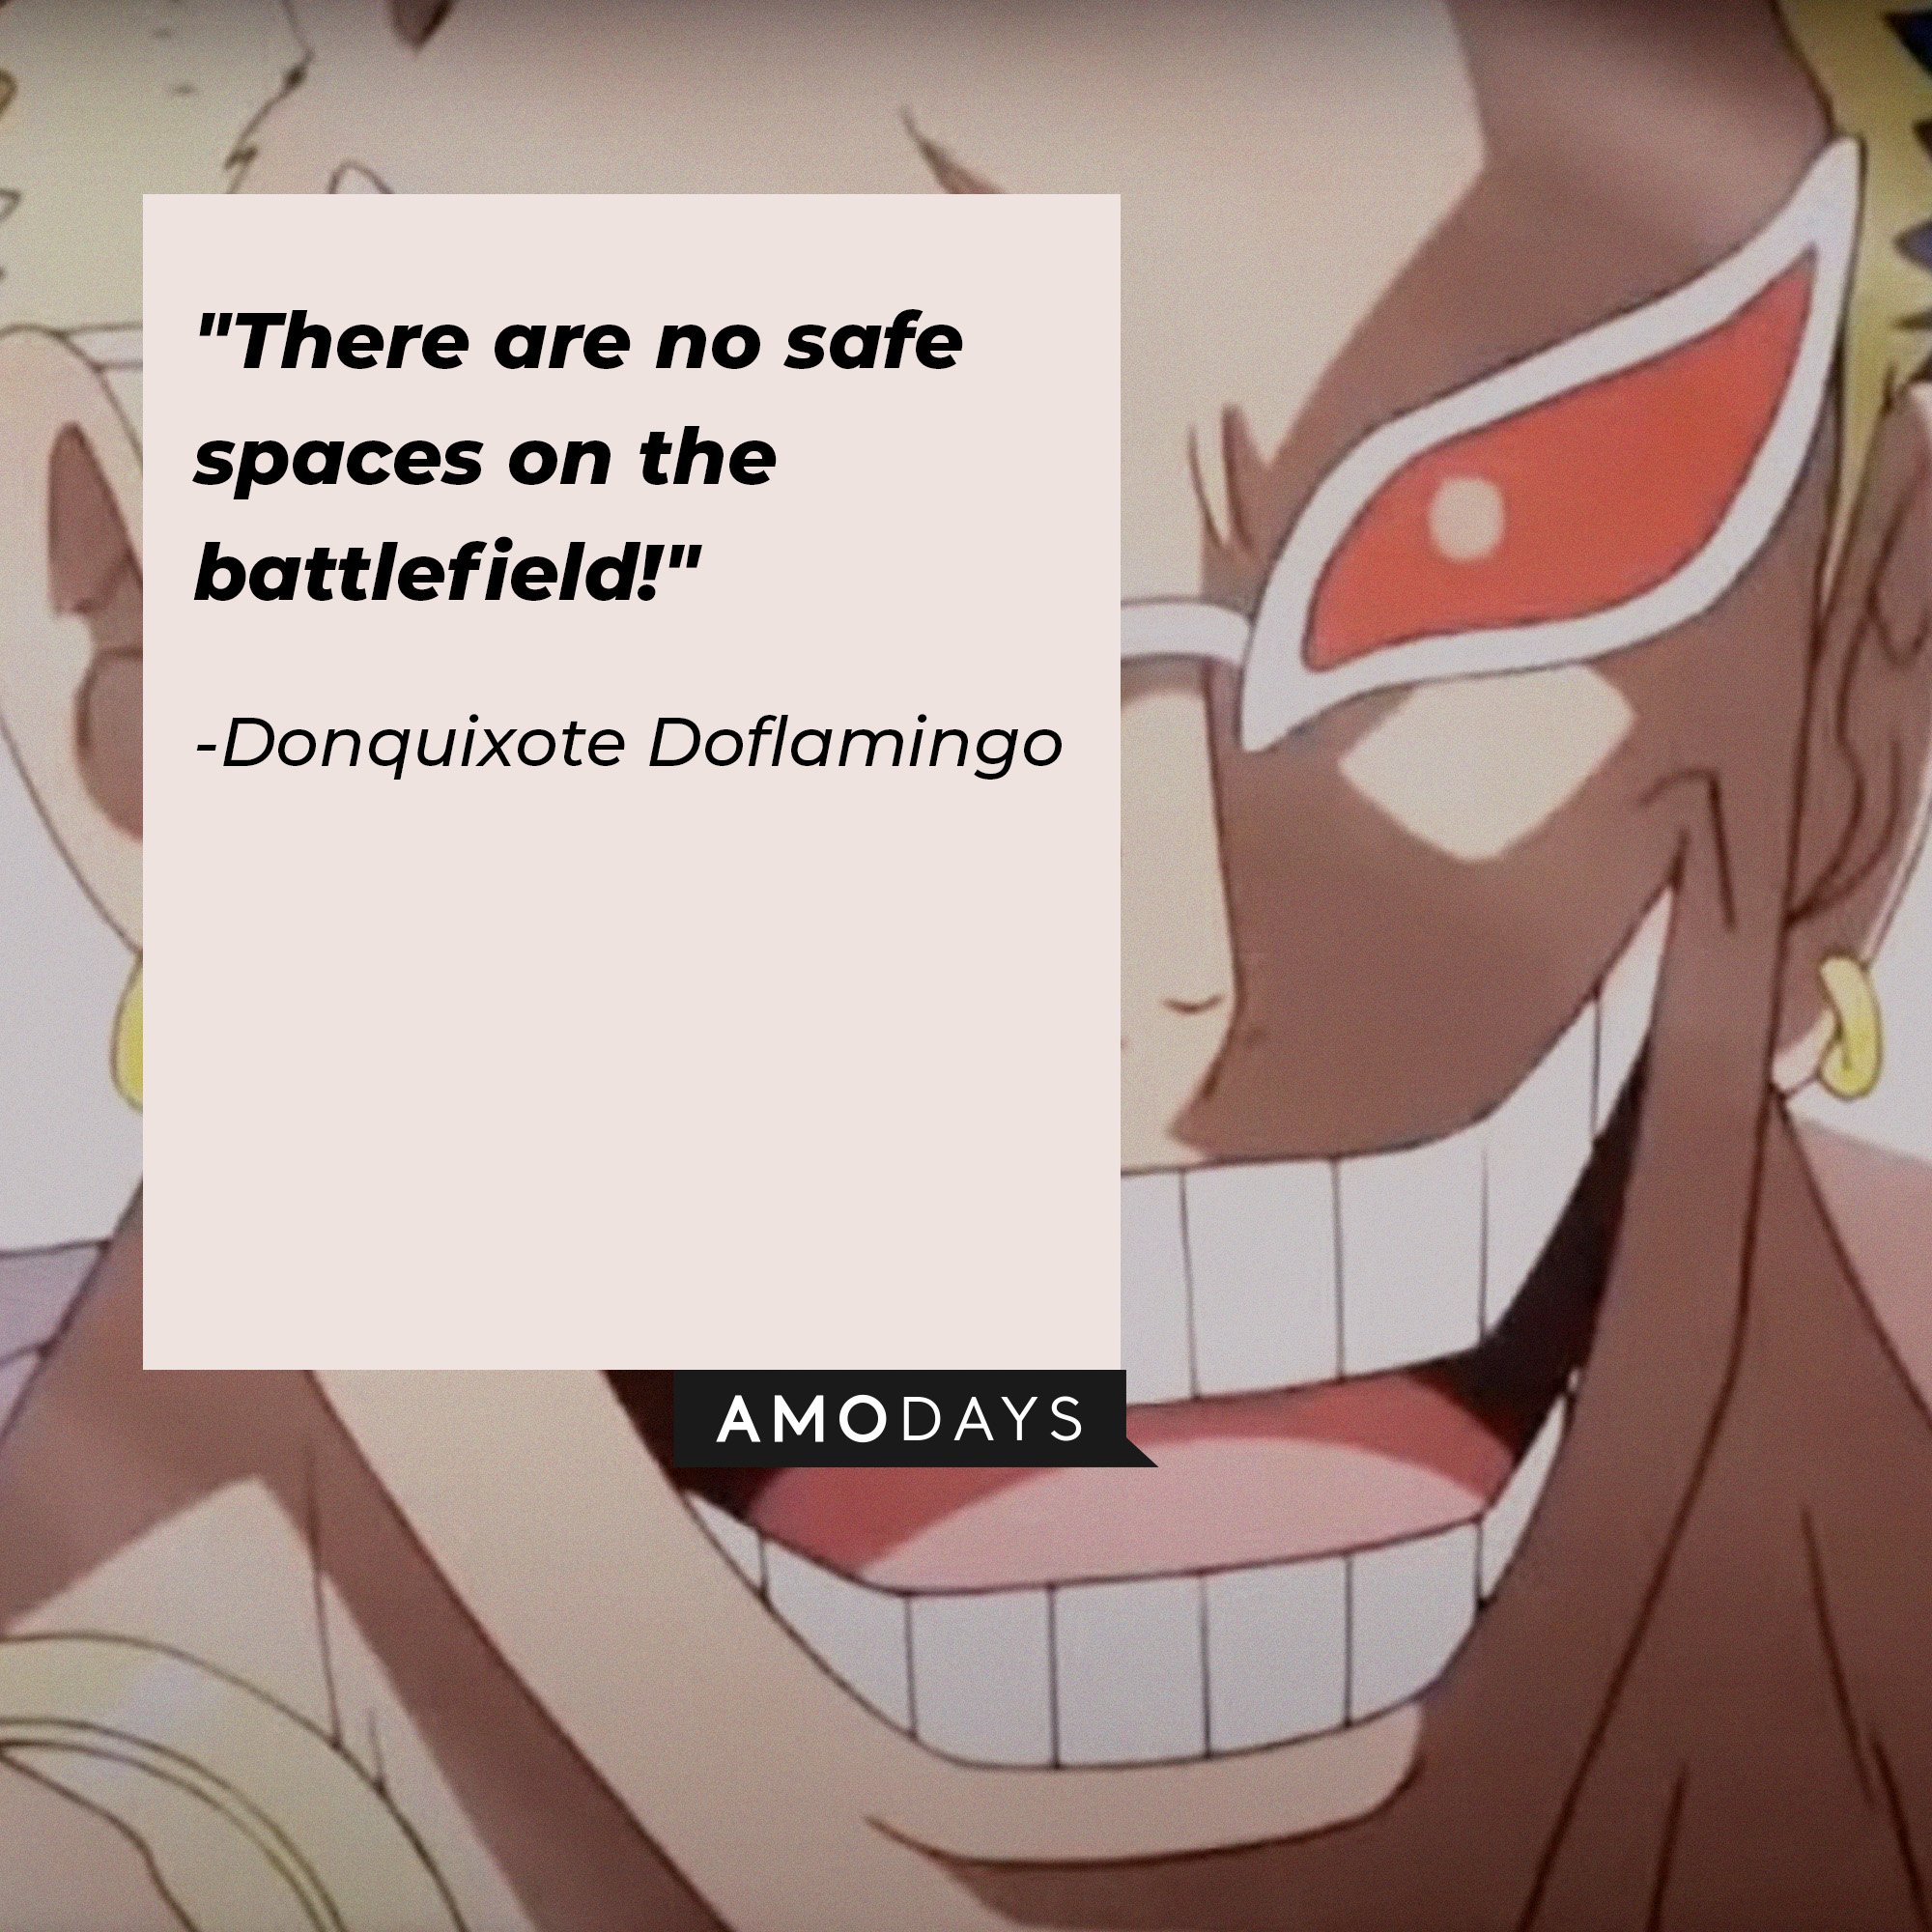 Donquixote Doflamingo’s quote: "There are no safe spaces on the battlefield!" | Image: AmoDays